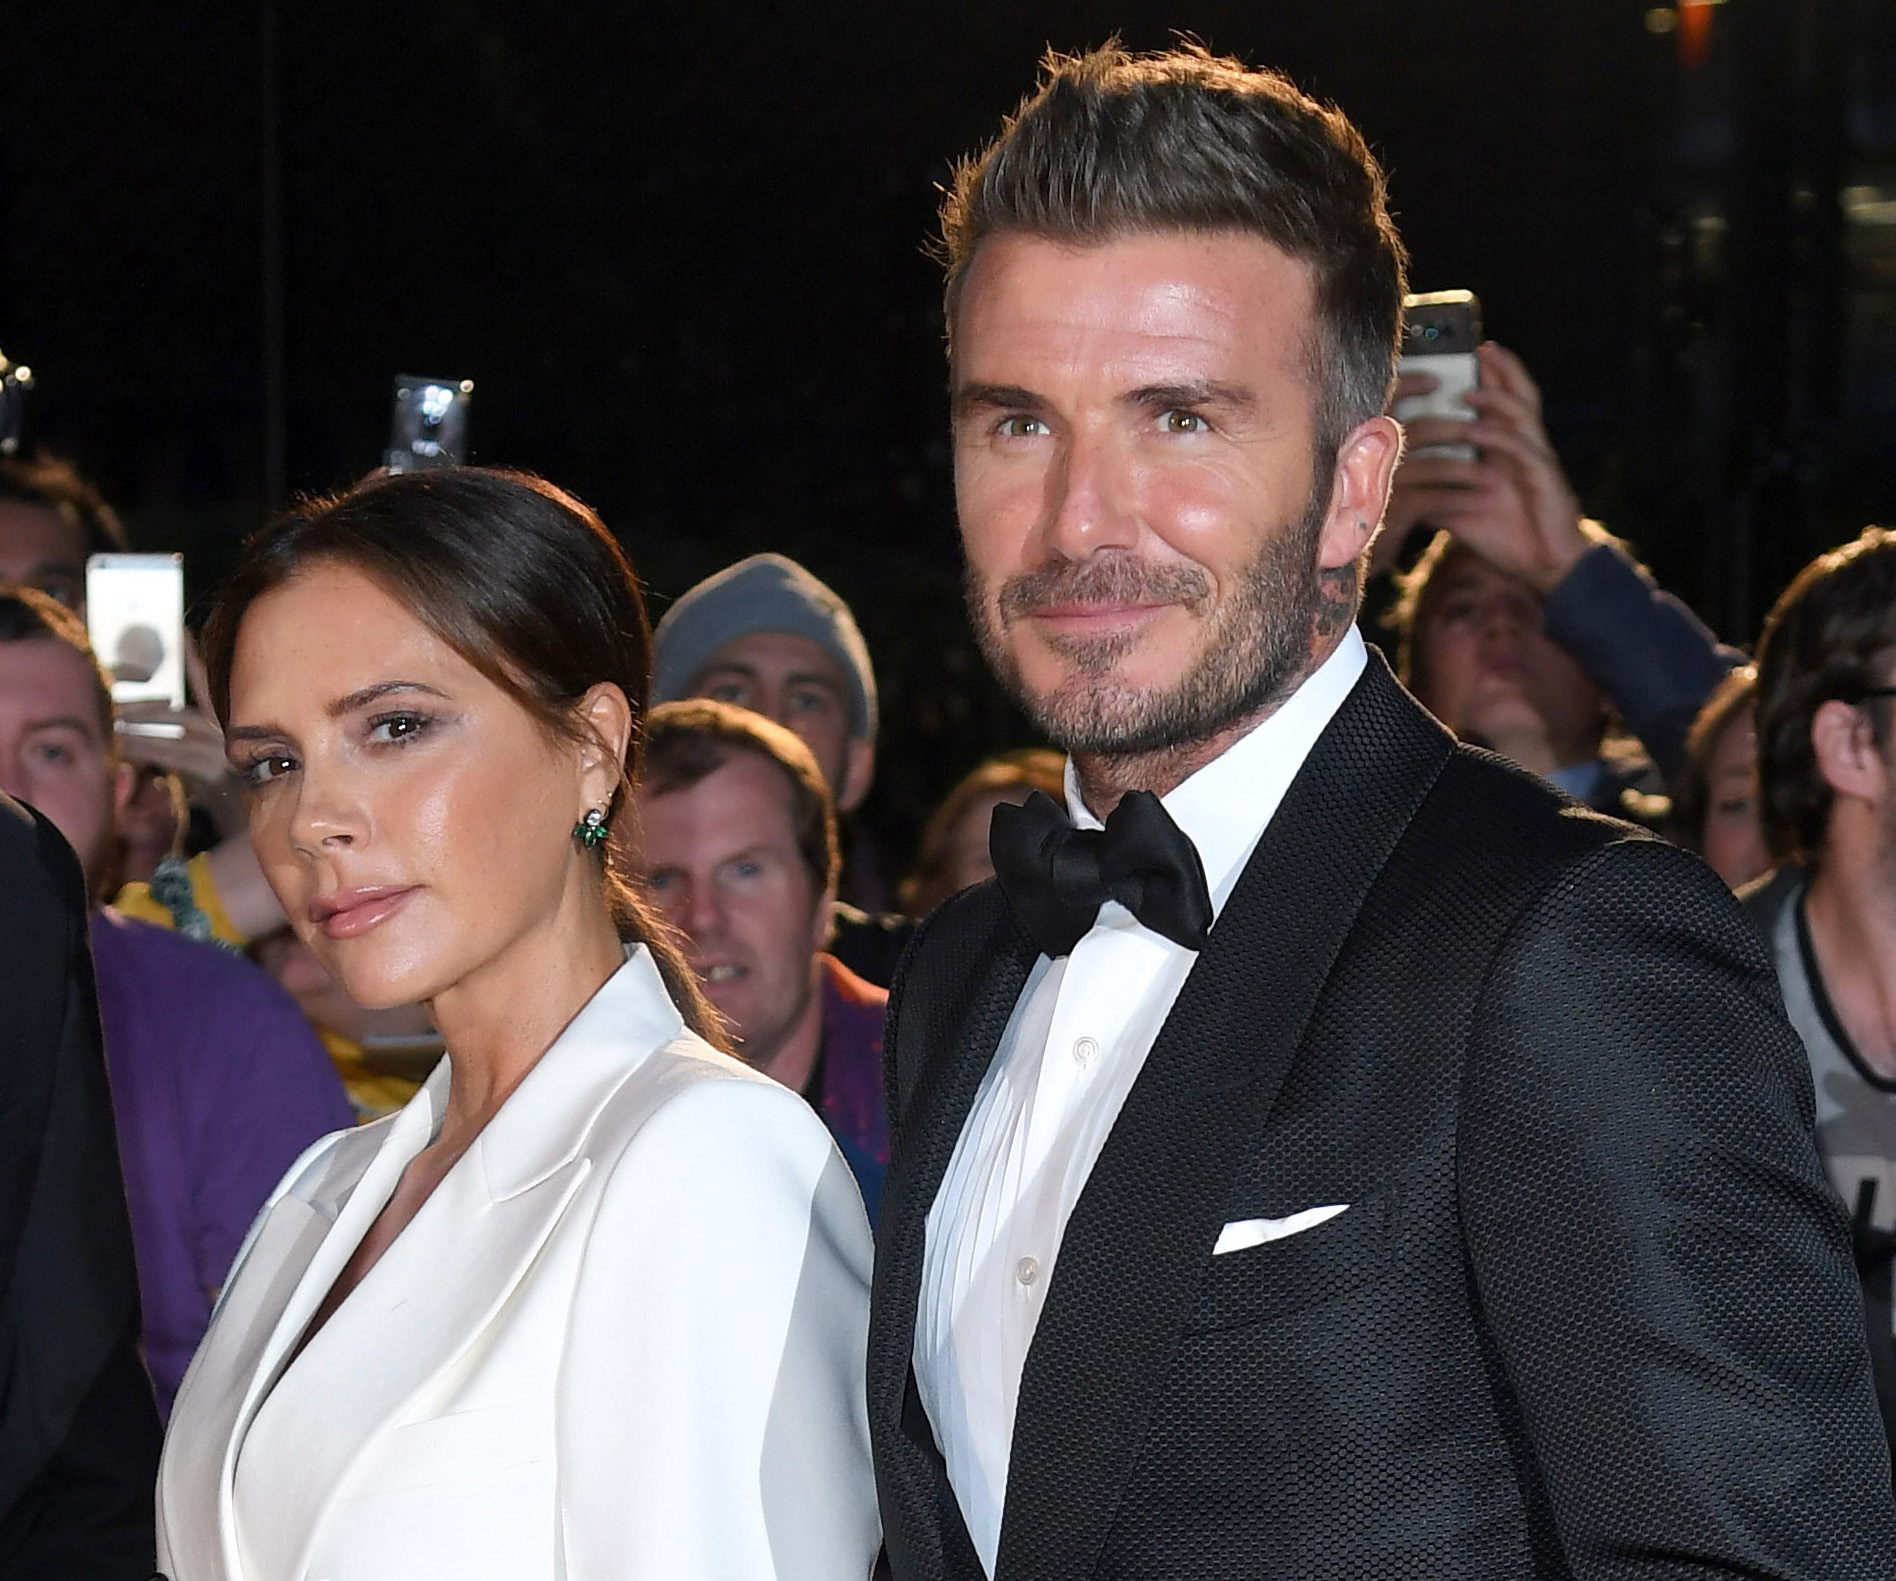 Victoria Beckham says it was “love at first sight” for her and husband David Beckham